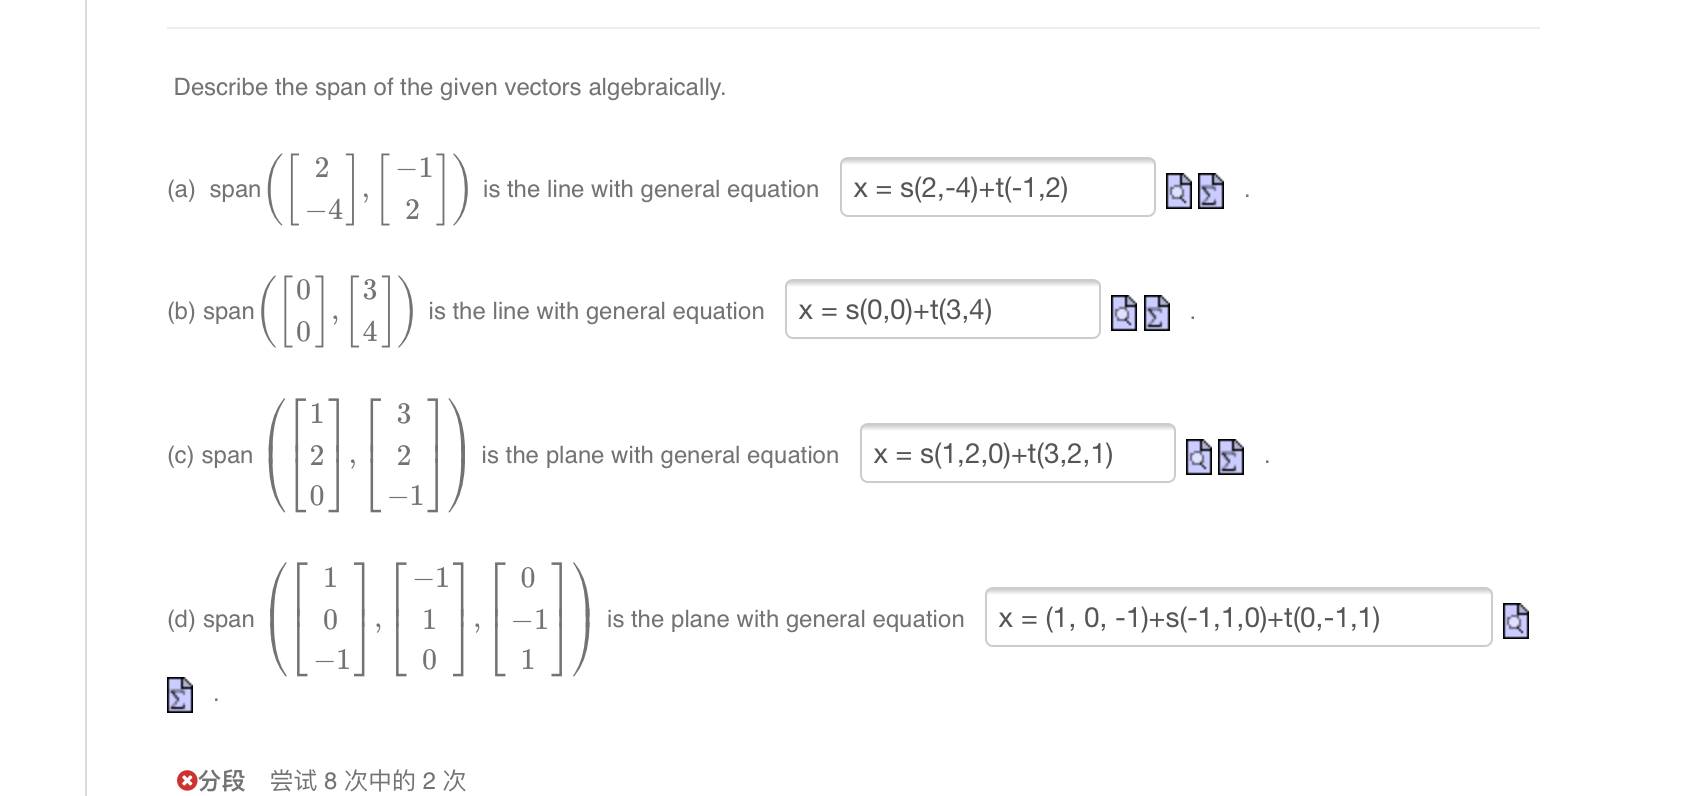 Strait character Invoice Solved Describe the span of the given vectors algebraically. | Chegg.com